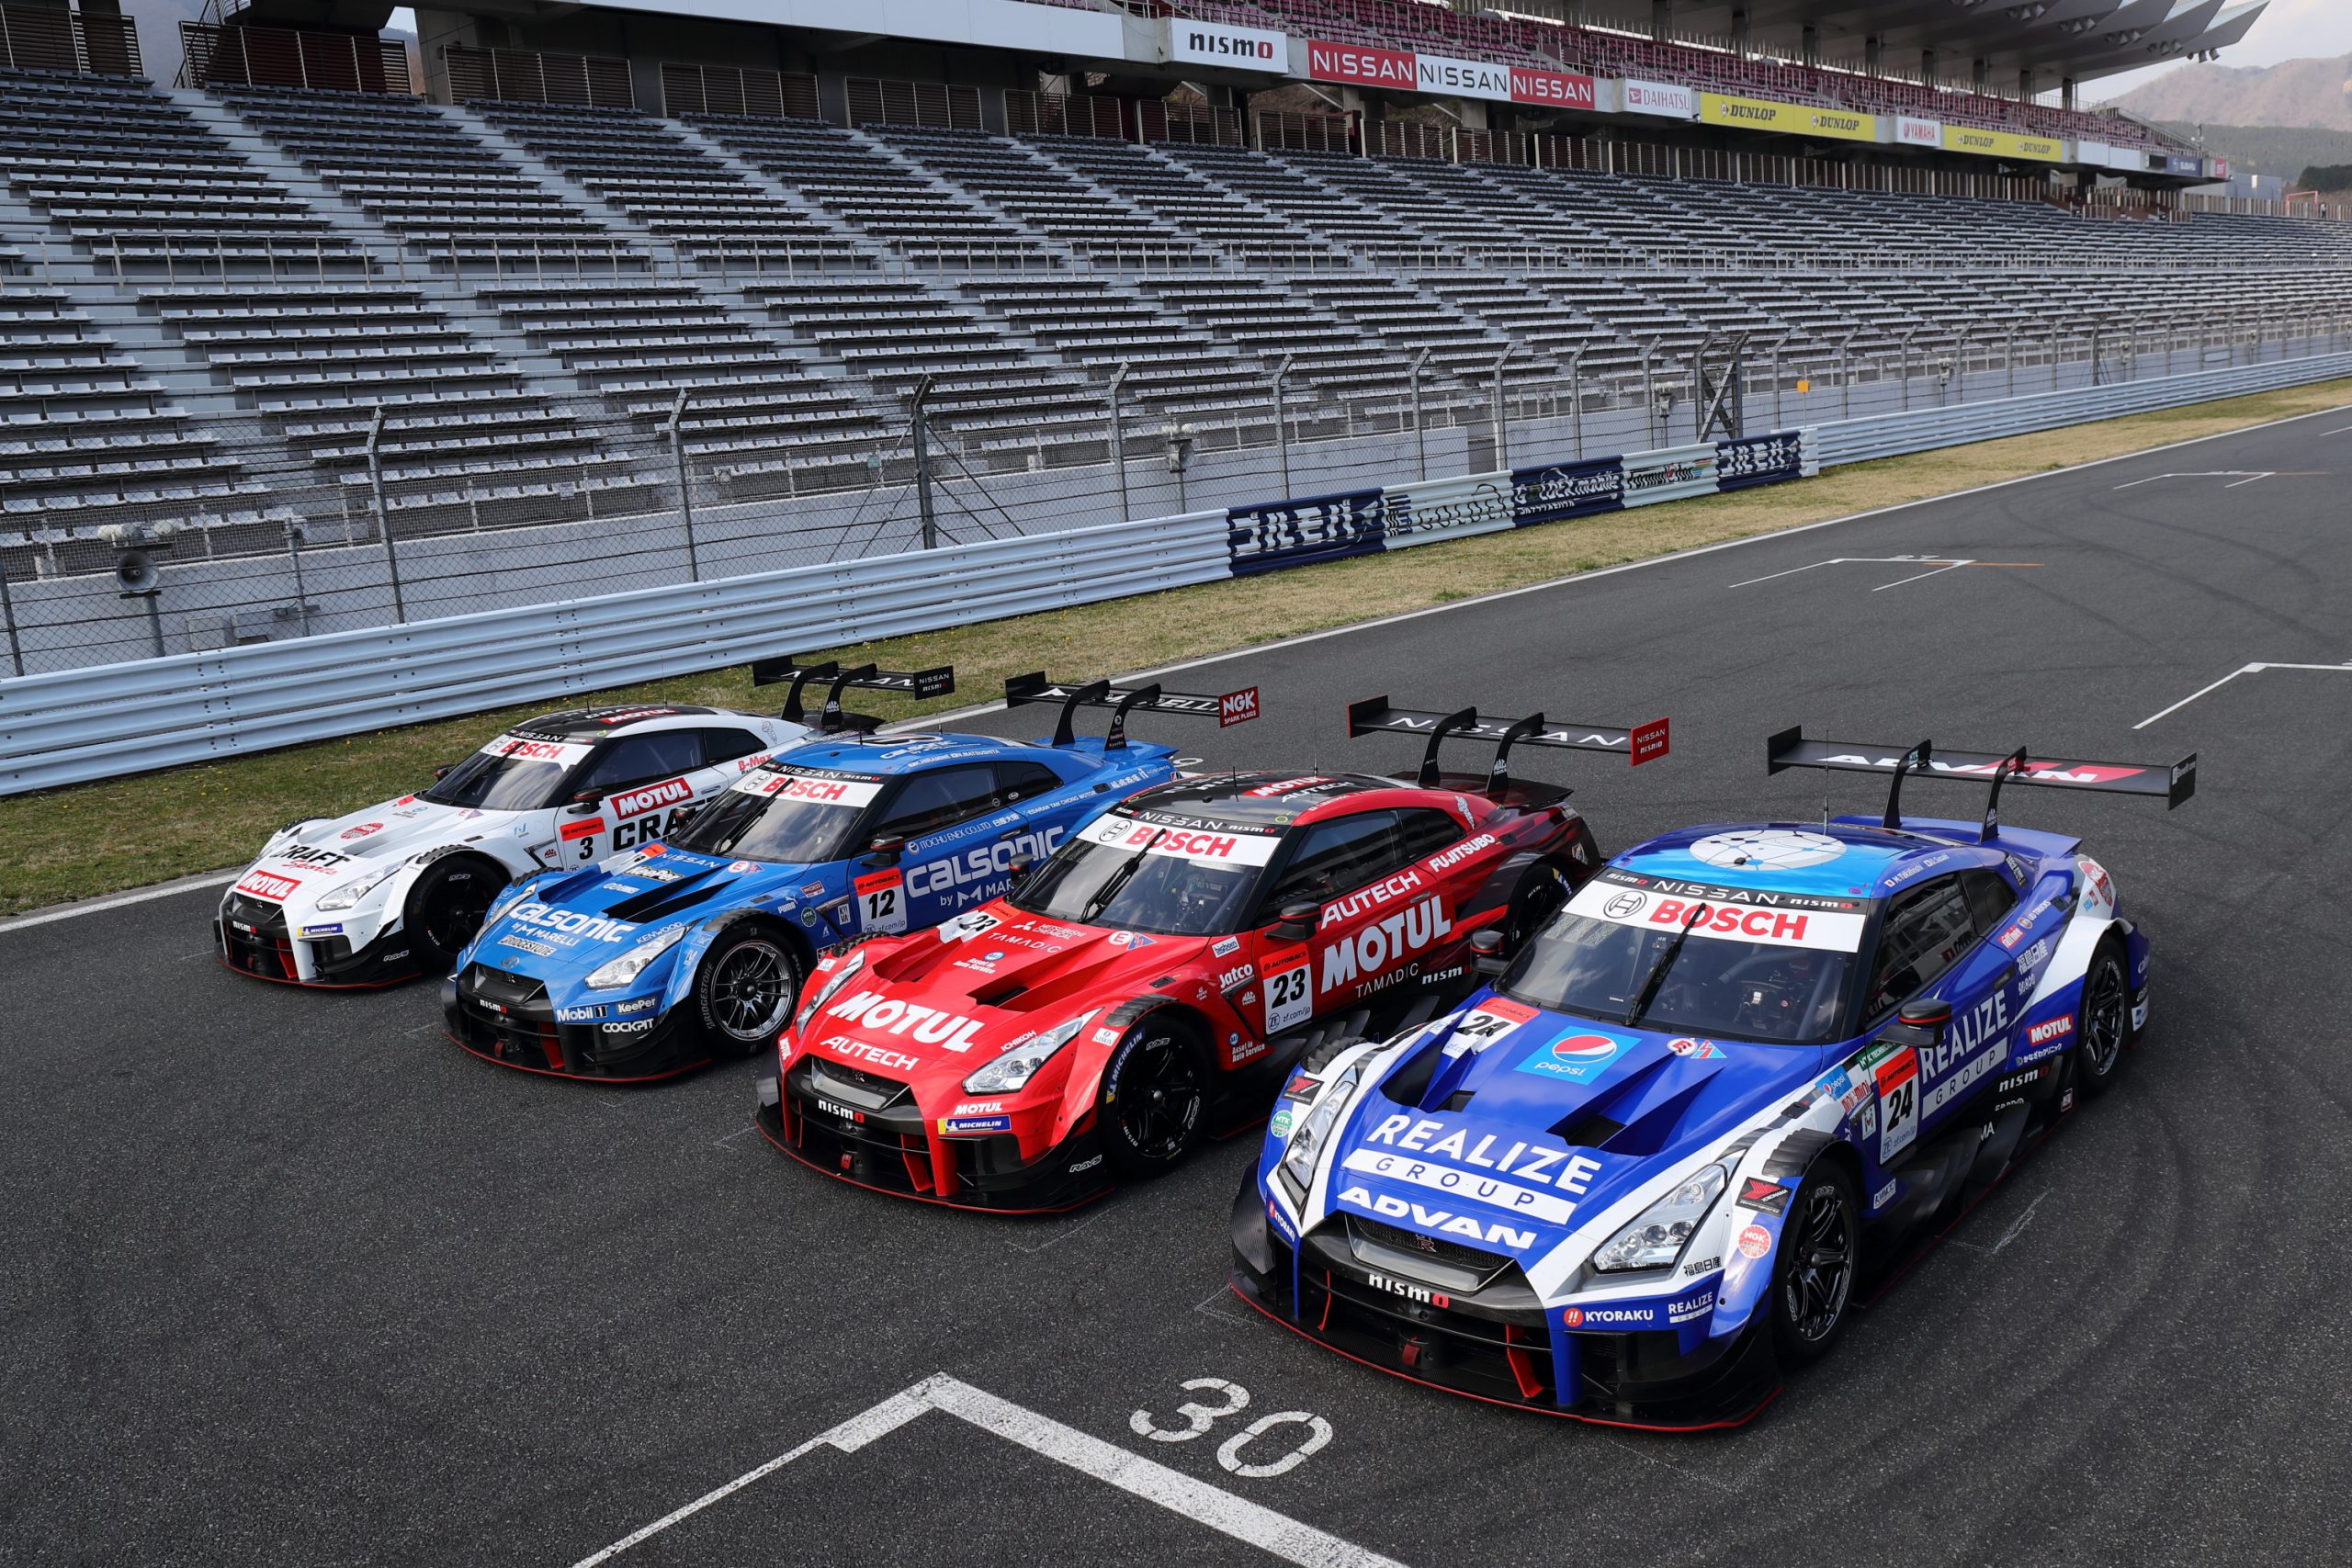 General 2560x1707 Nismo Nissan GT-R NISMO Nissan GT-R race cars race tracks livery Super GT blue cars red cars motorsport car vehicle racing Nissan Japanese cars